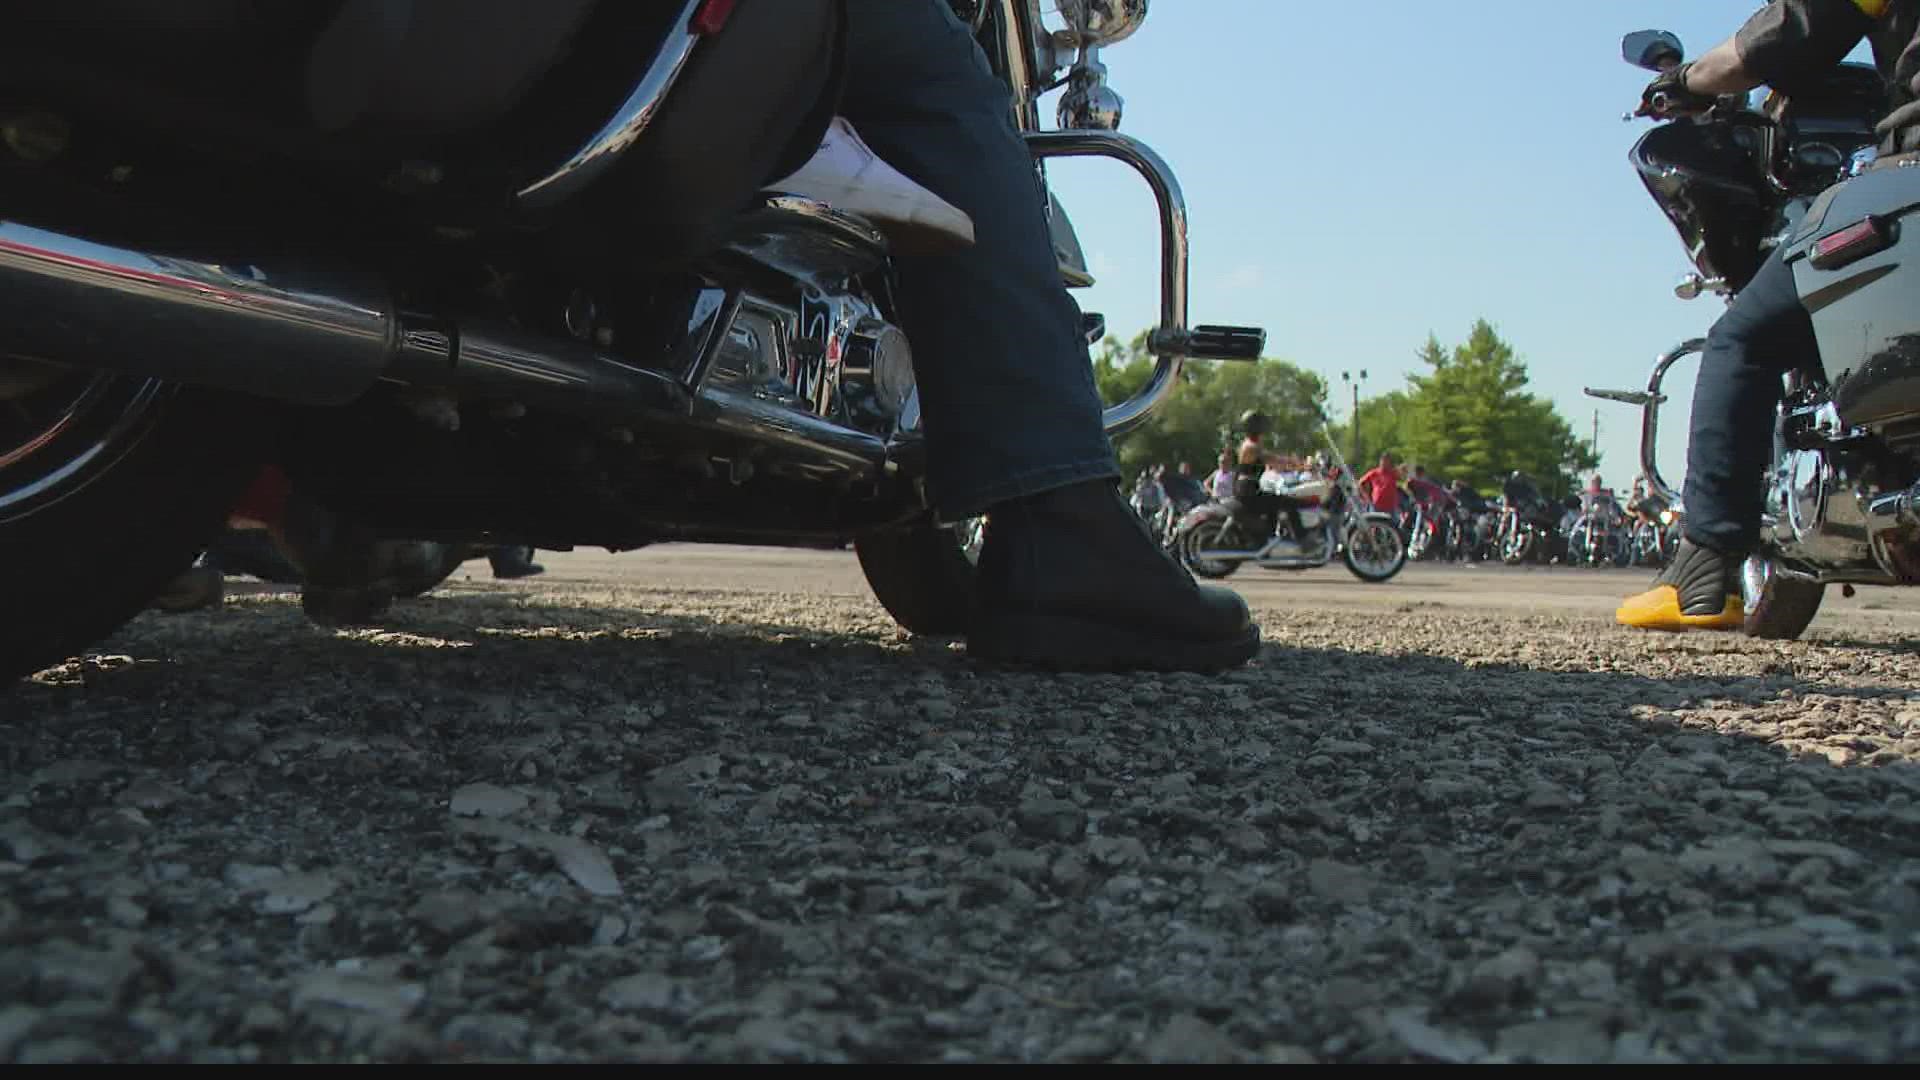 For the 27th year, motorcyclists participated in the annual Riley Miracle Ride to raise money and awareness for the Riley Children’s Foundation.